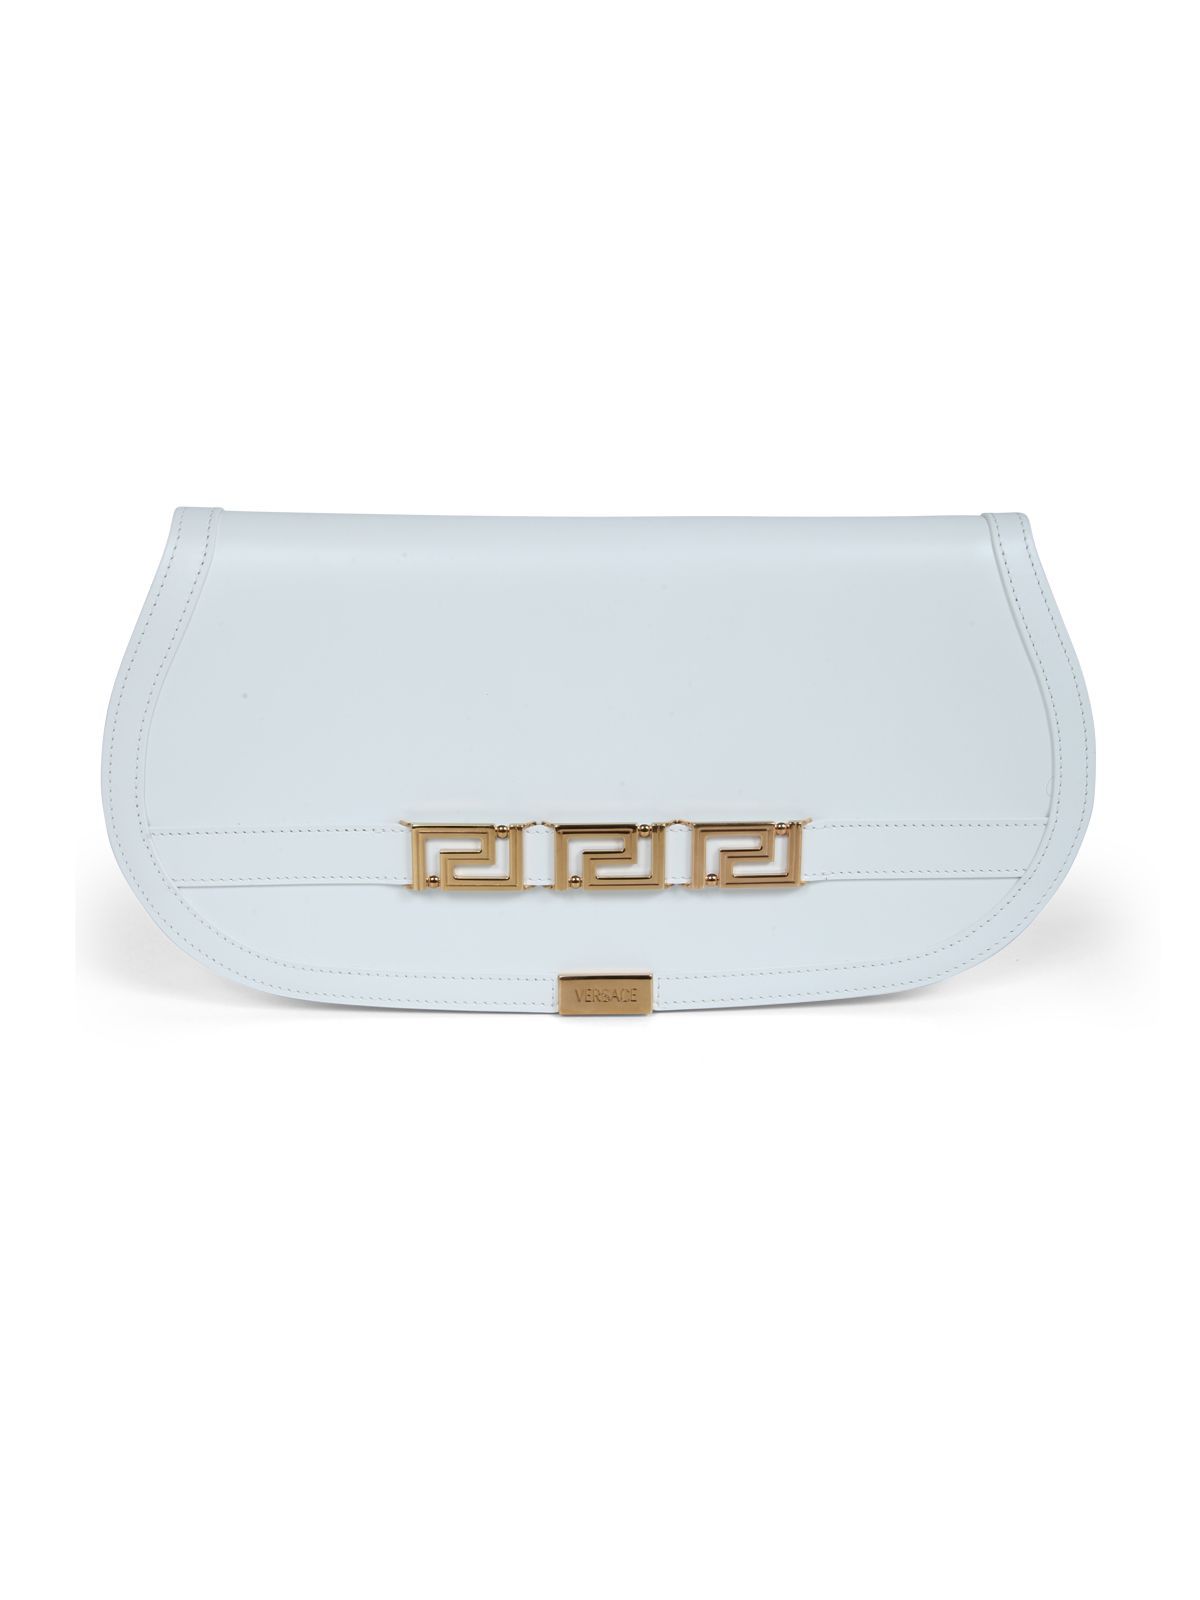 Shop Versace Leather Clutch: Cow Leather